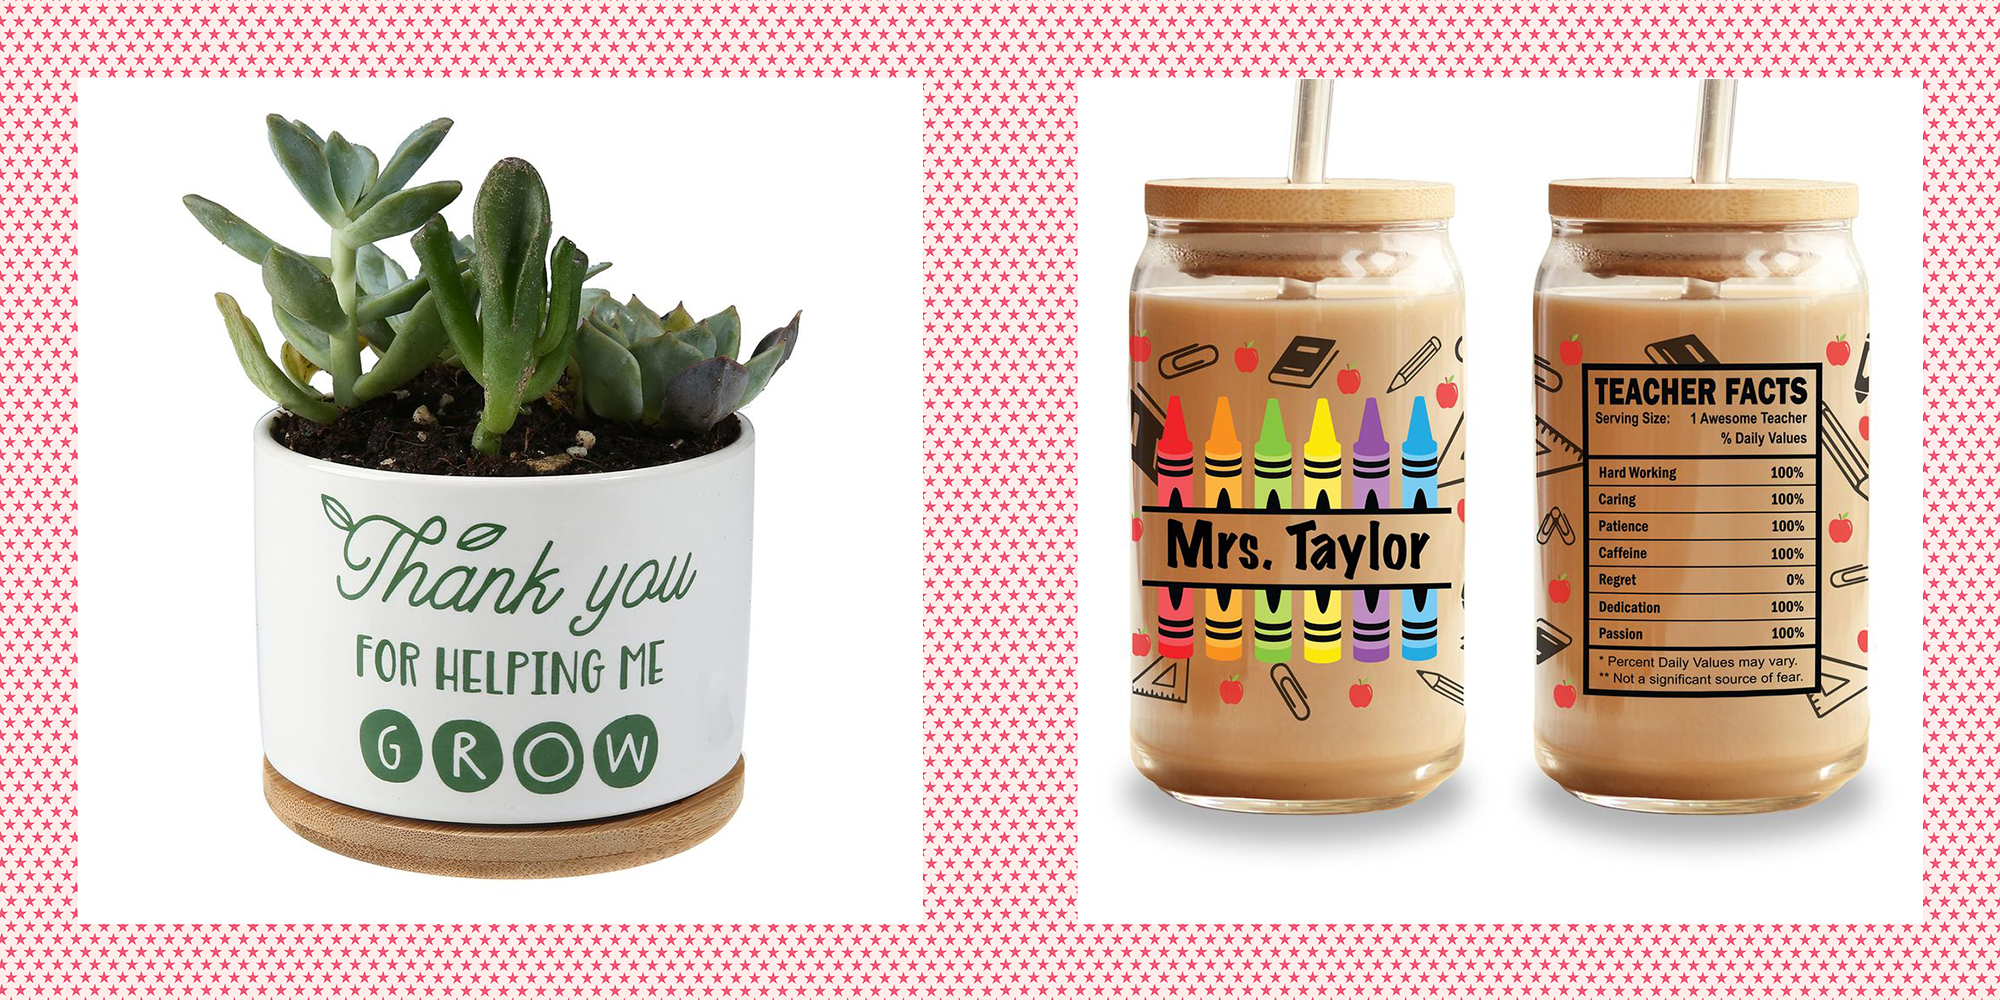 30 Teacher Appreciation Gifts They Really Want, According to Actual Educators